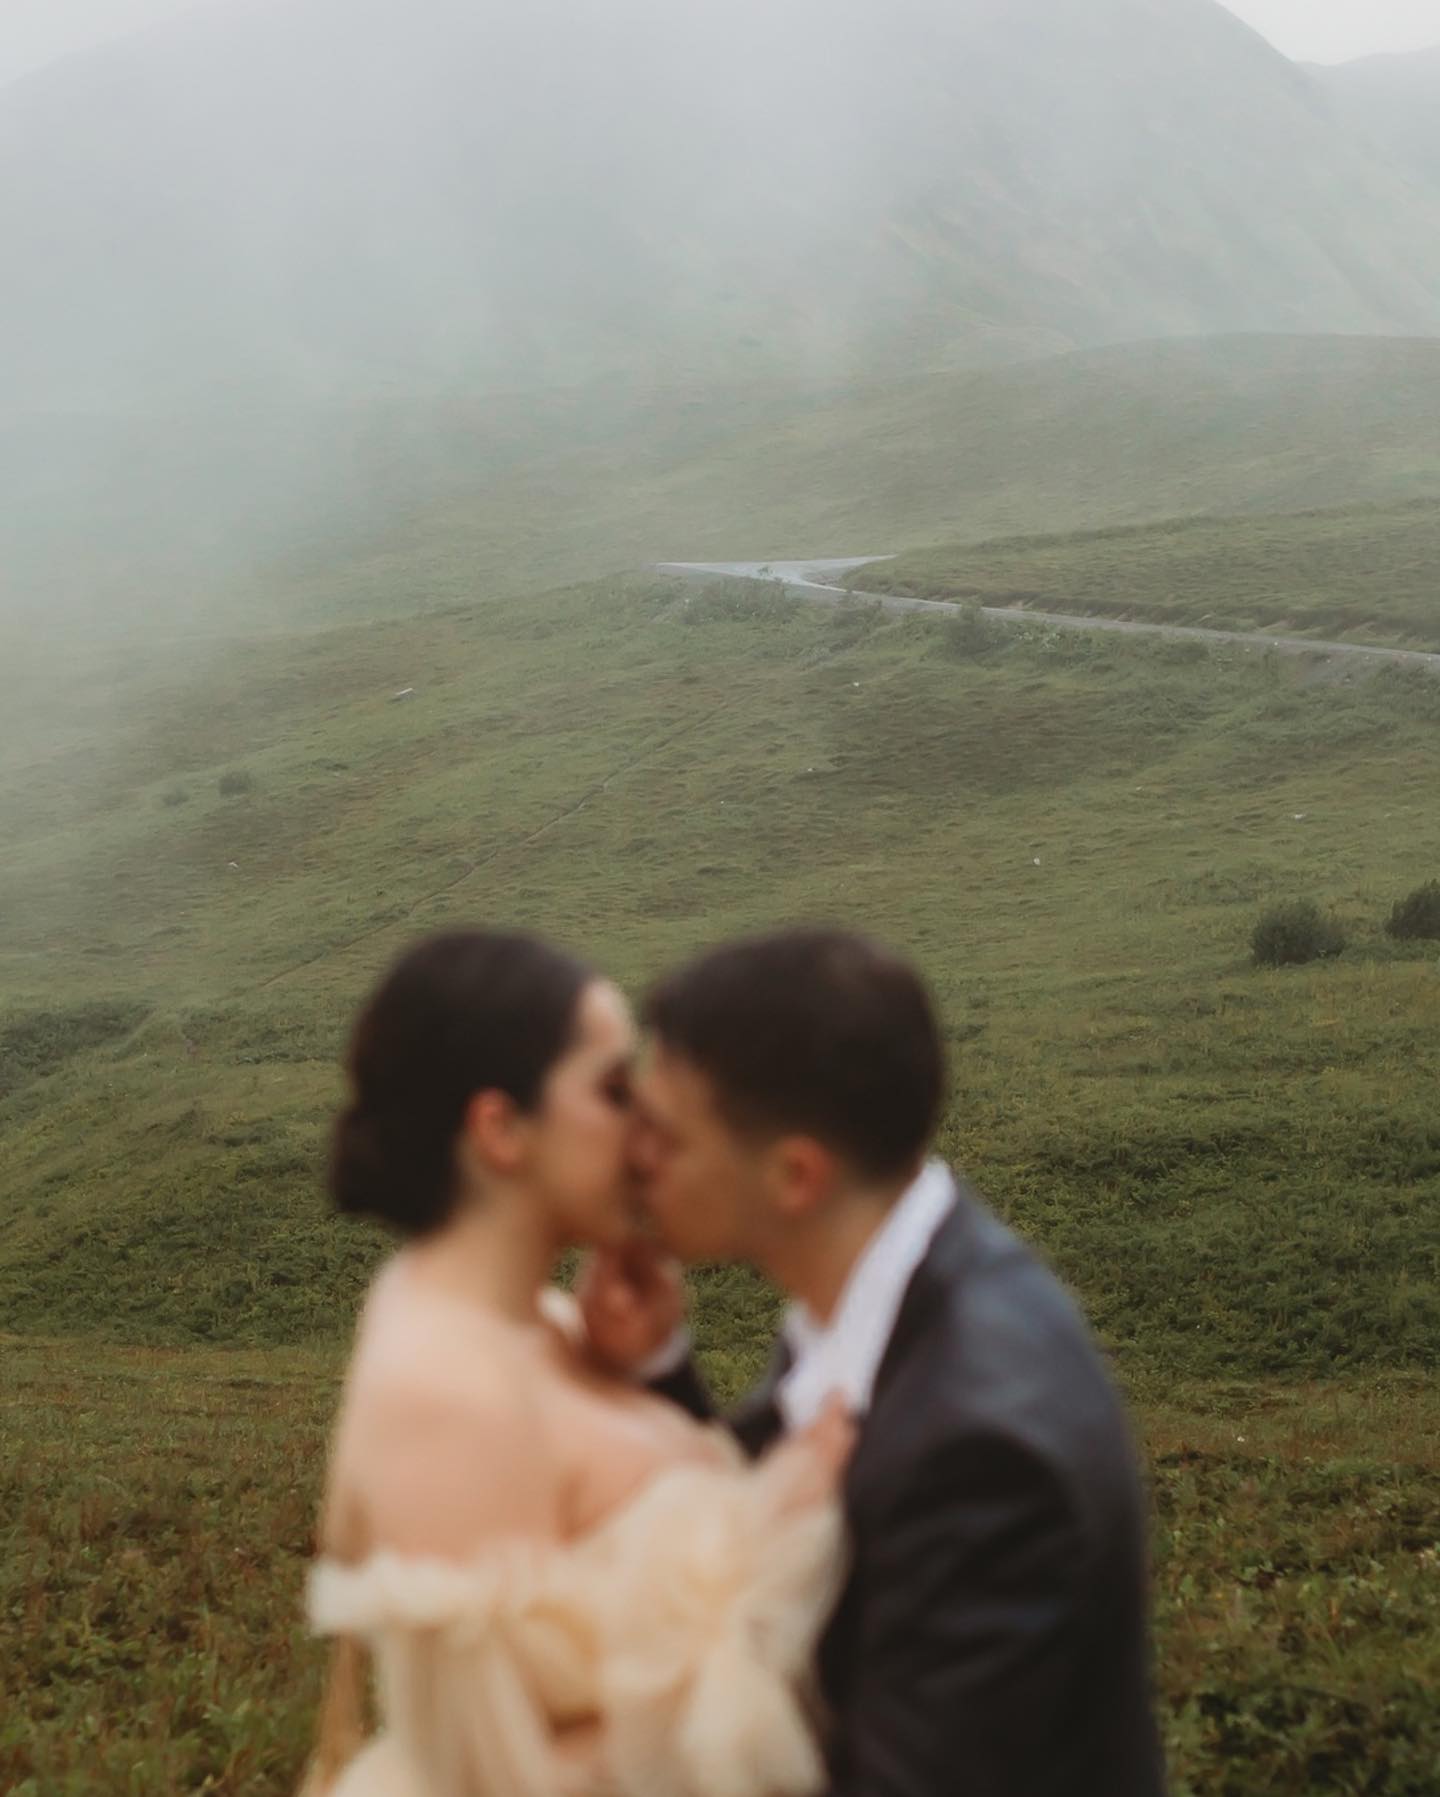 a wedding couple kissing off focus in the foreground with foggy hilly landscape in the background